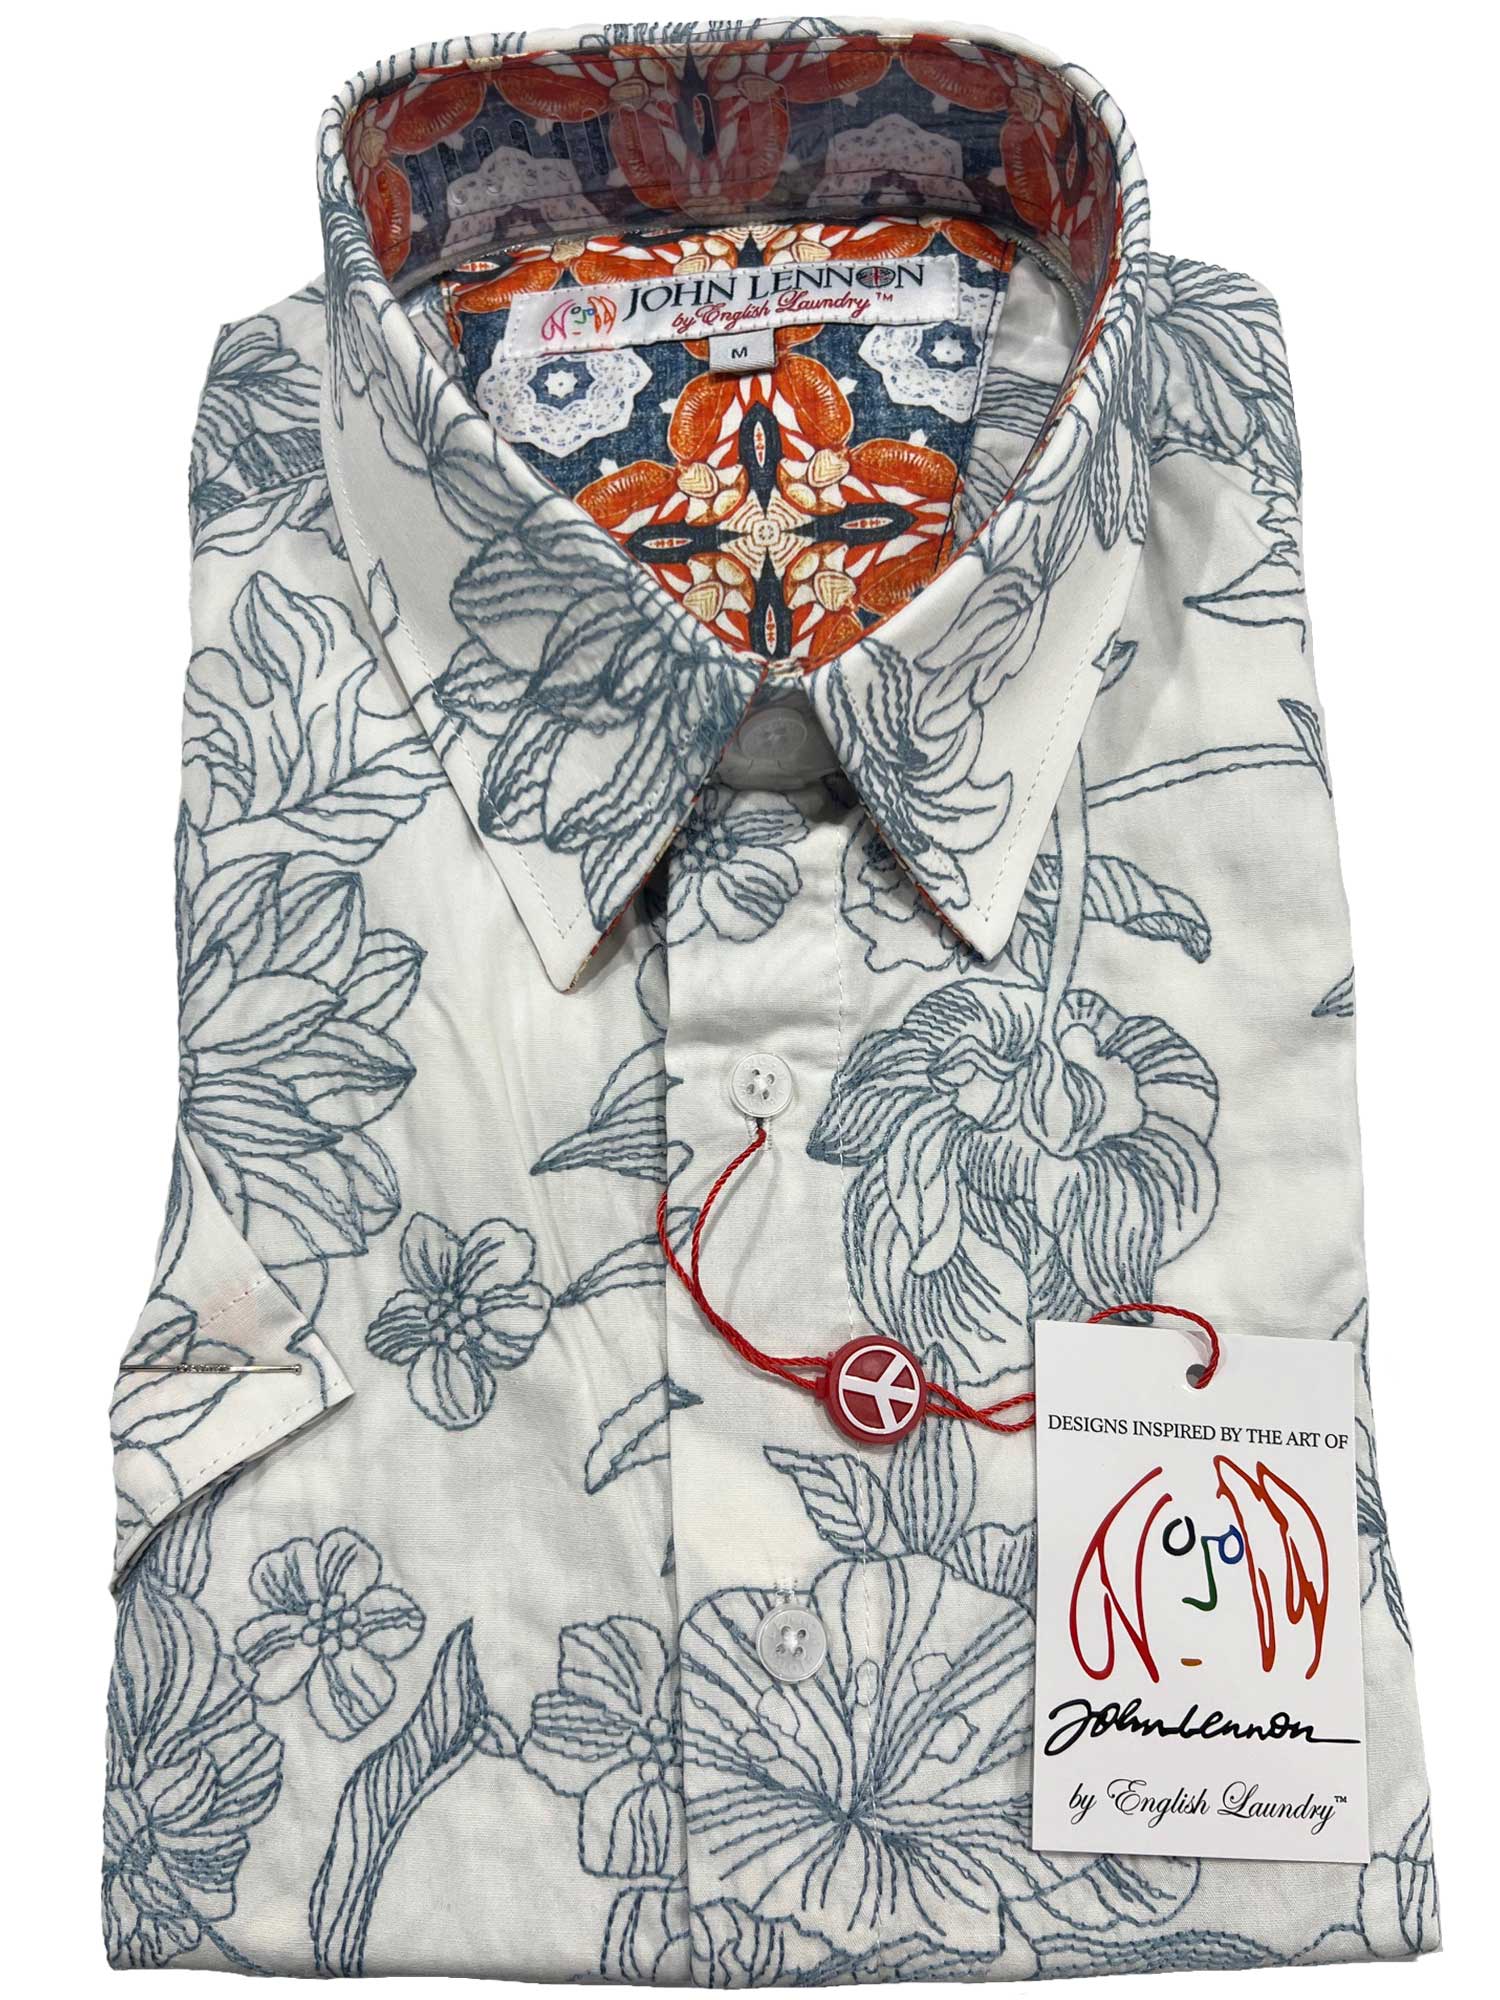 Blackpool JLW8090 S/S  https://harrysformenswear.com.au/products/blackpool-jlw8090-s-s  Short-Sleeve Slim Fit by John Lennon All Cotton with a touch of classic detailing that reflects the fashion and sense of John Lennon's uniqueness. Creating harmony and peace with nature, this shirt does in spades. John Lennon for English Laundry….The Sleeping Giant. This is the 10th season Australian retailers have s…